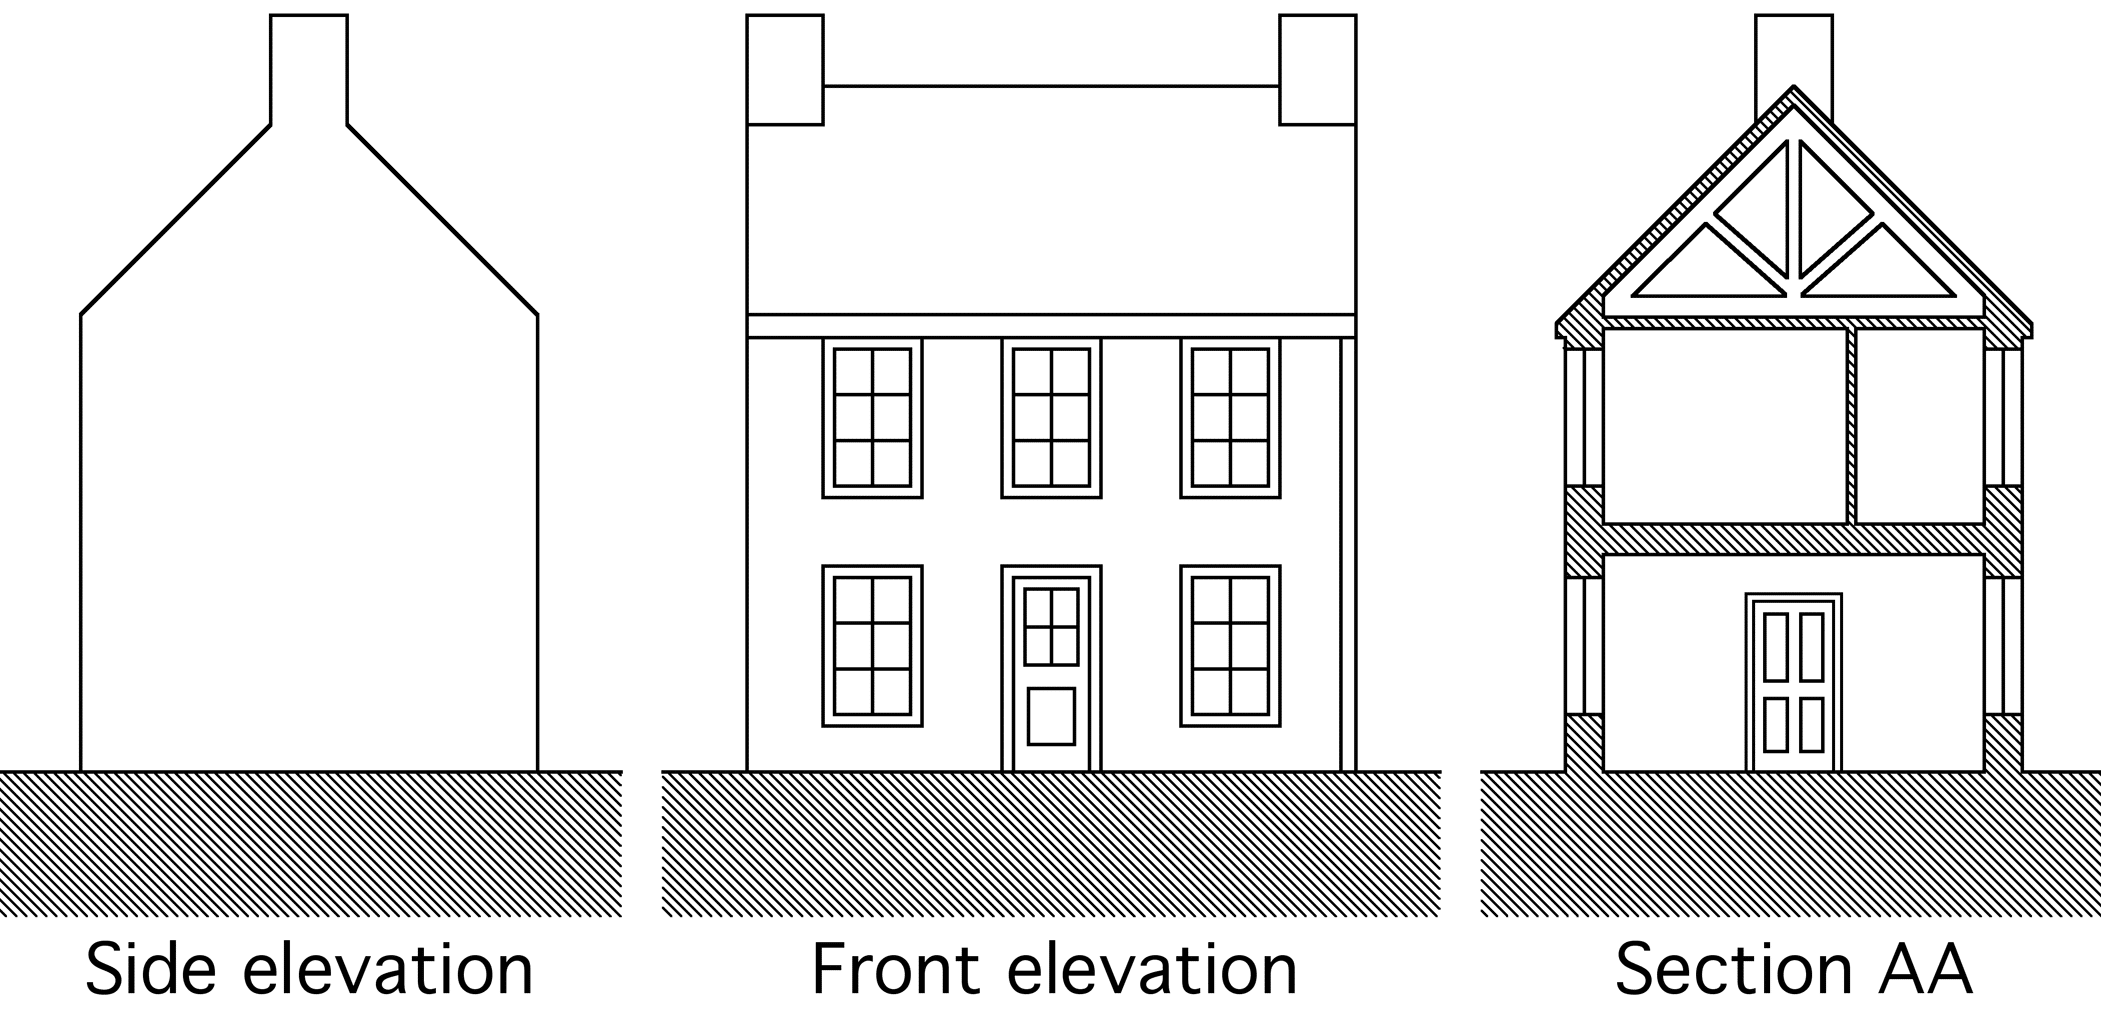 Two elevations and one cross-section of a house